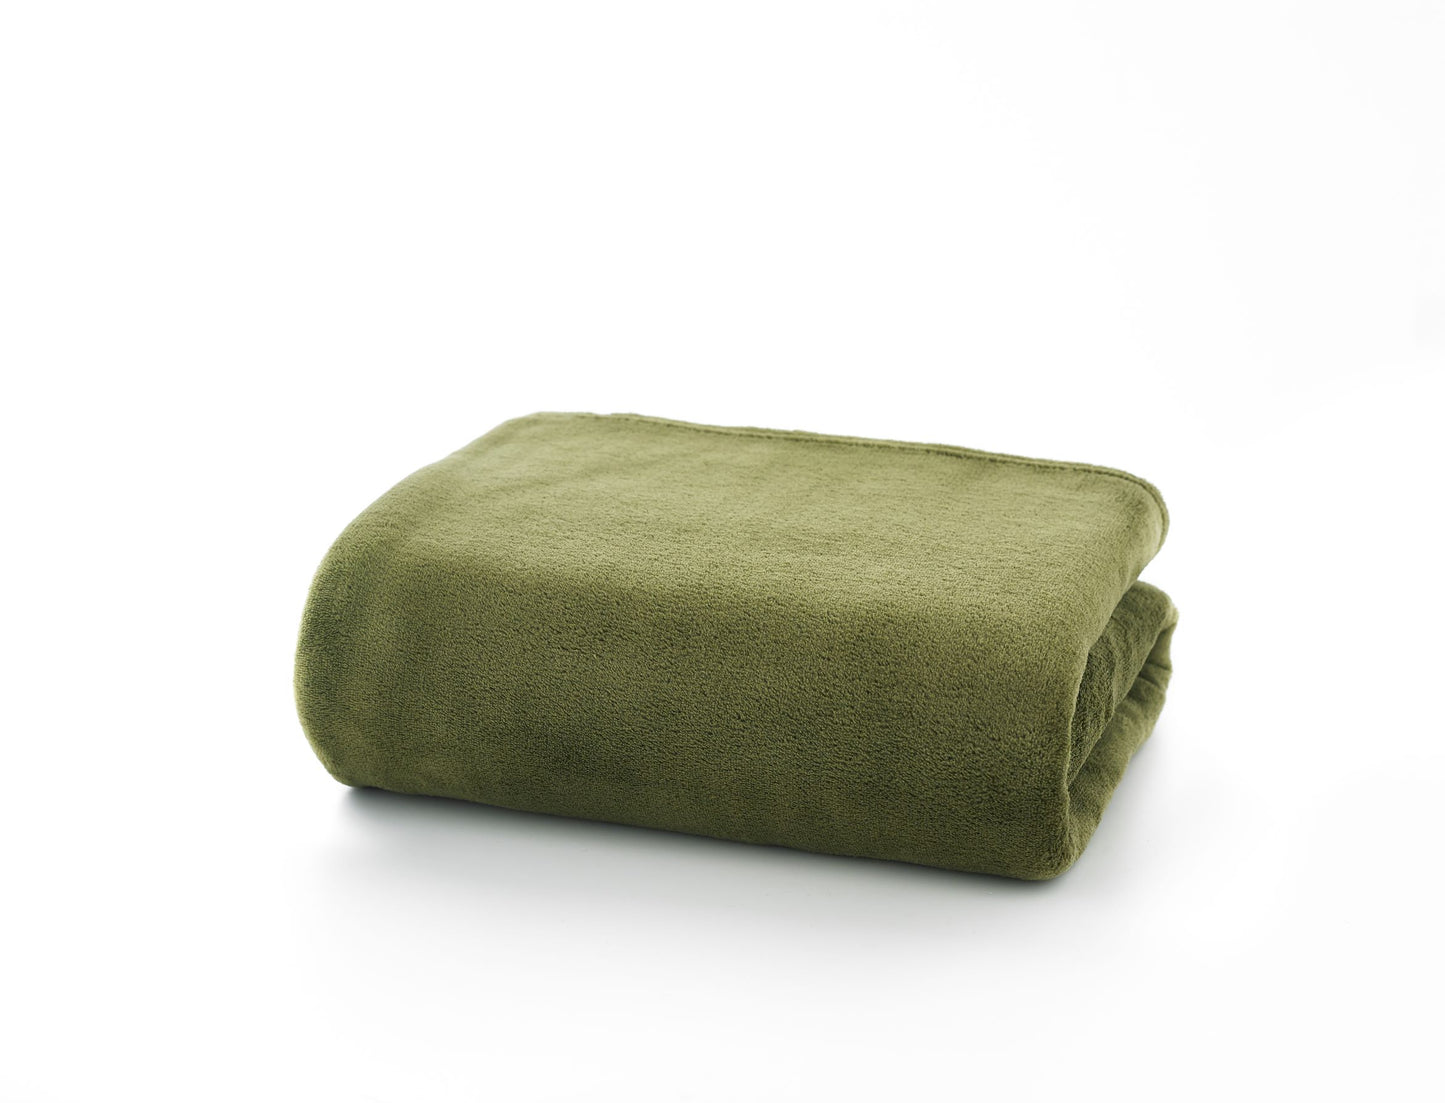 Snuggletouch Supersoft Throw in Olive Green